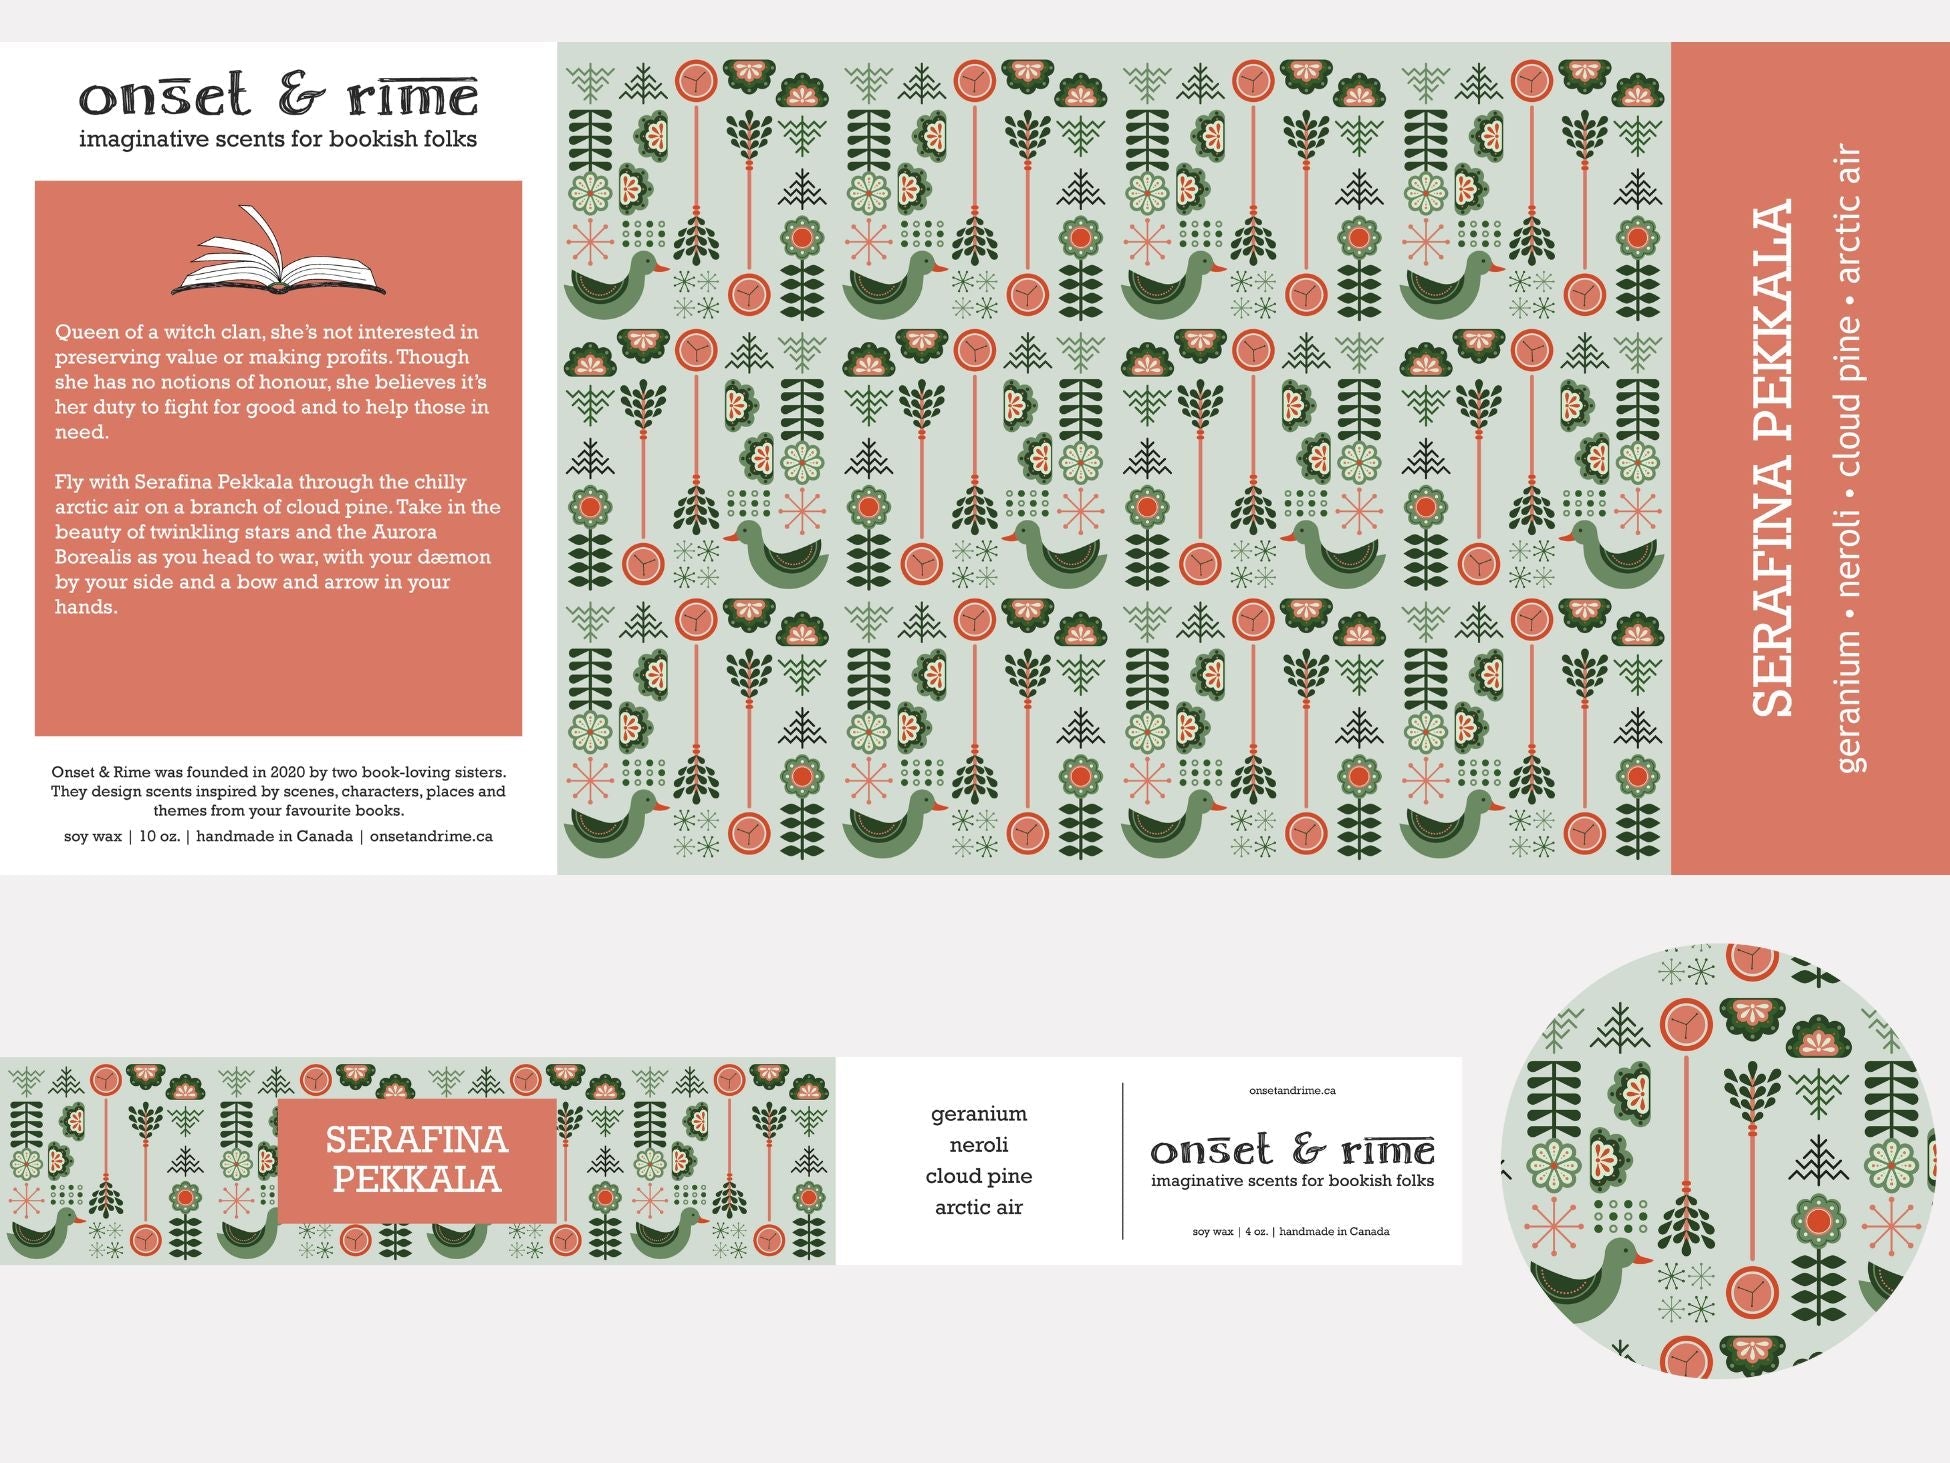 A close up view of the label for the Onset & Rime floral pine scented candle called 